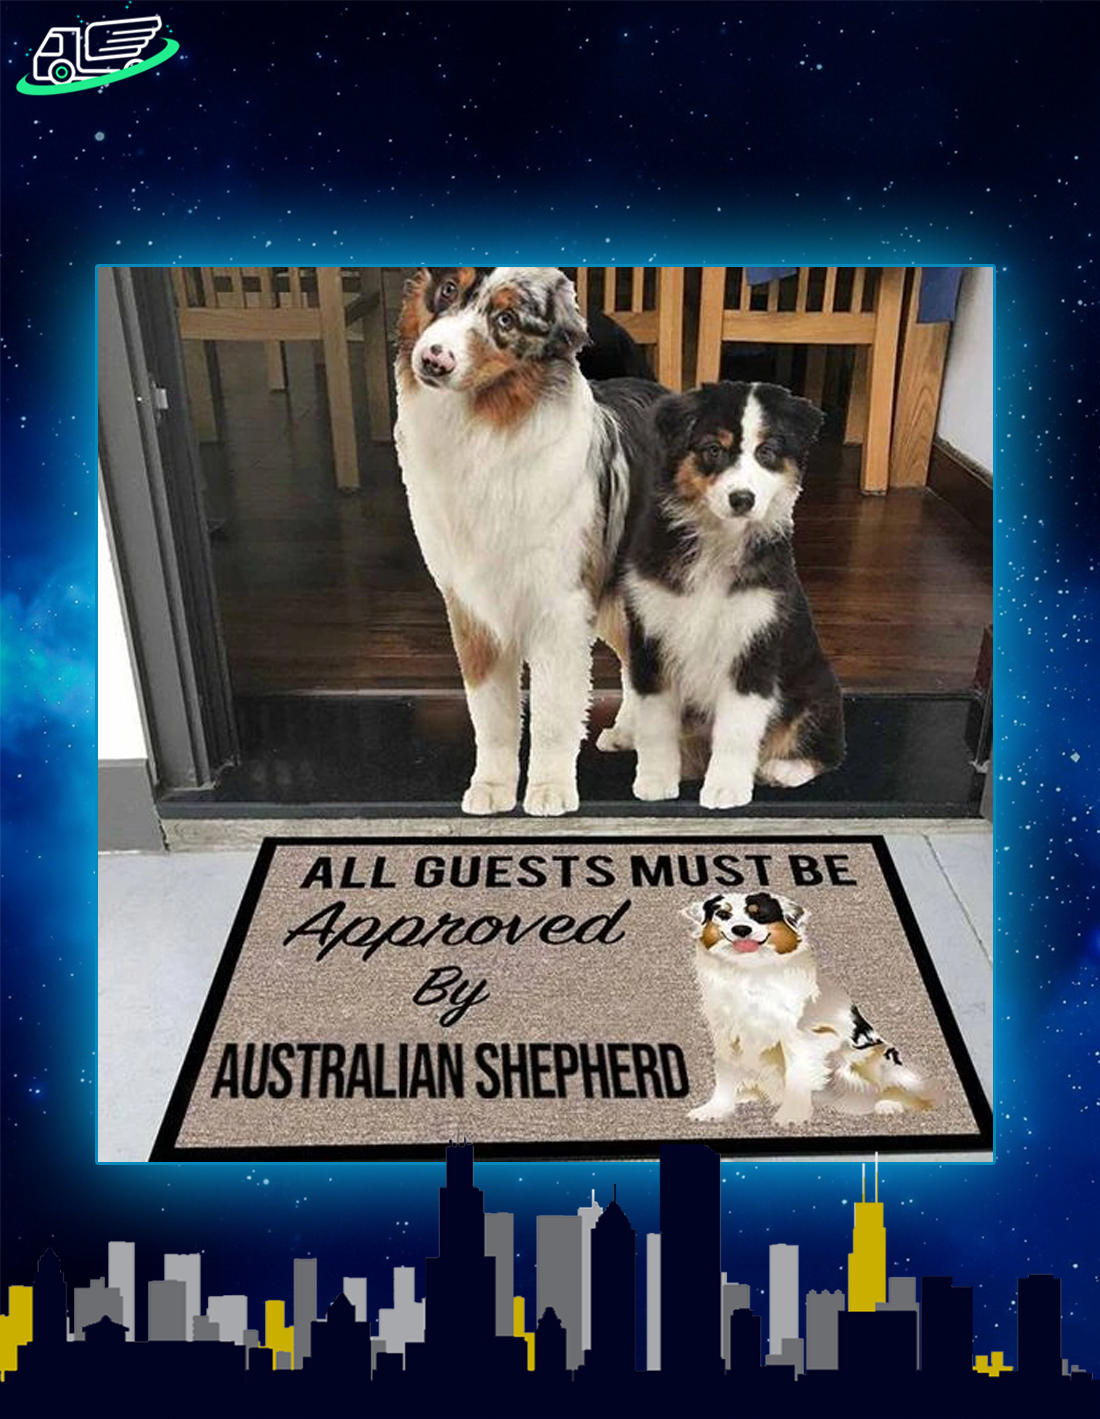 All guests must be approved by australian shepherd doormat